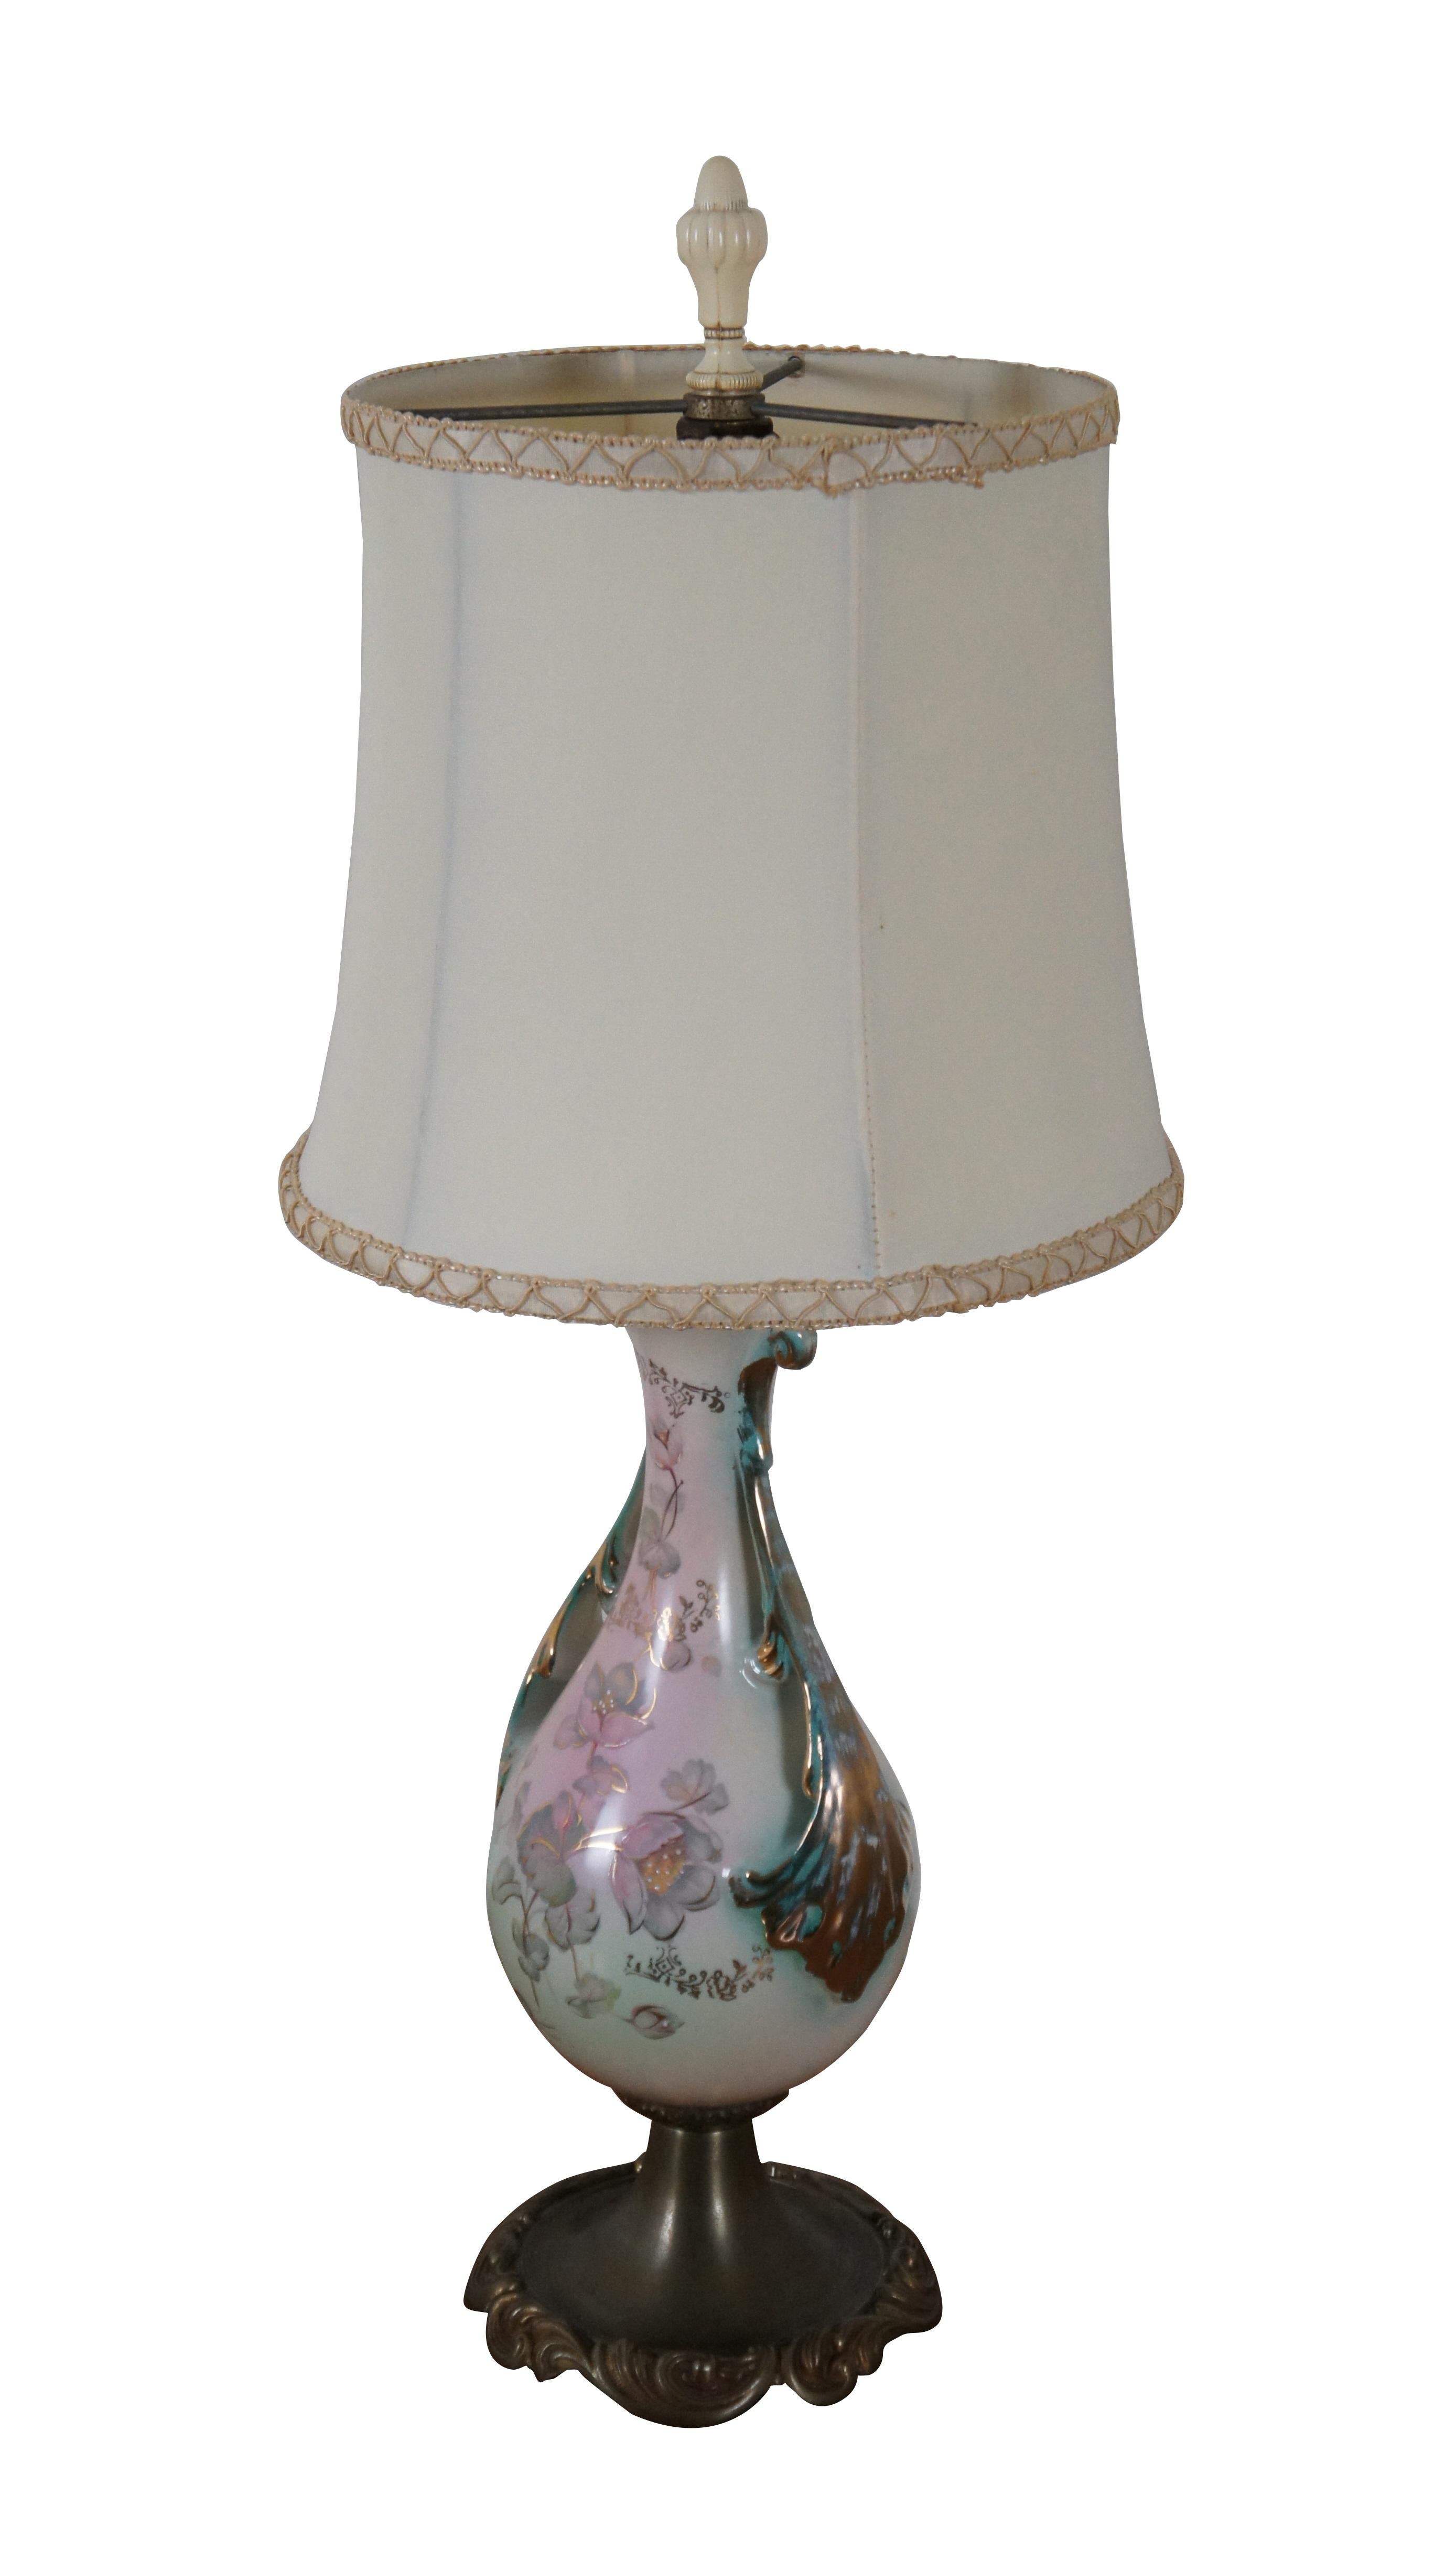 1940’s hand painted porcelain table lamp featuring trophy form with serpentine reticulated handles and Art Nouveau style metal base by Coronet. Features hand painted flowers on a pink and teal green ground, framed at the sides with gilded leaves.